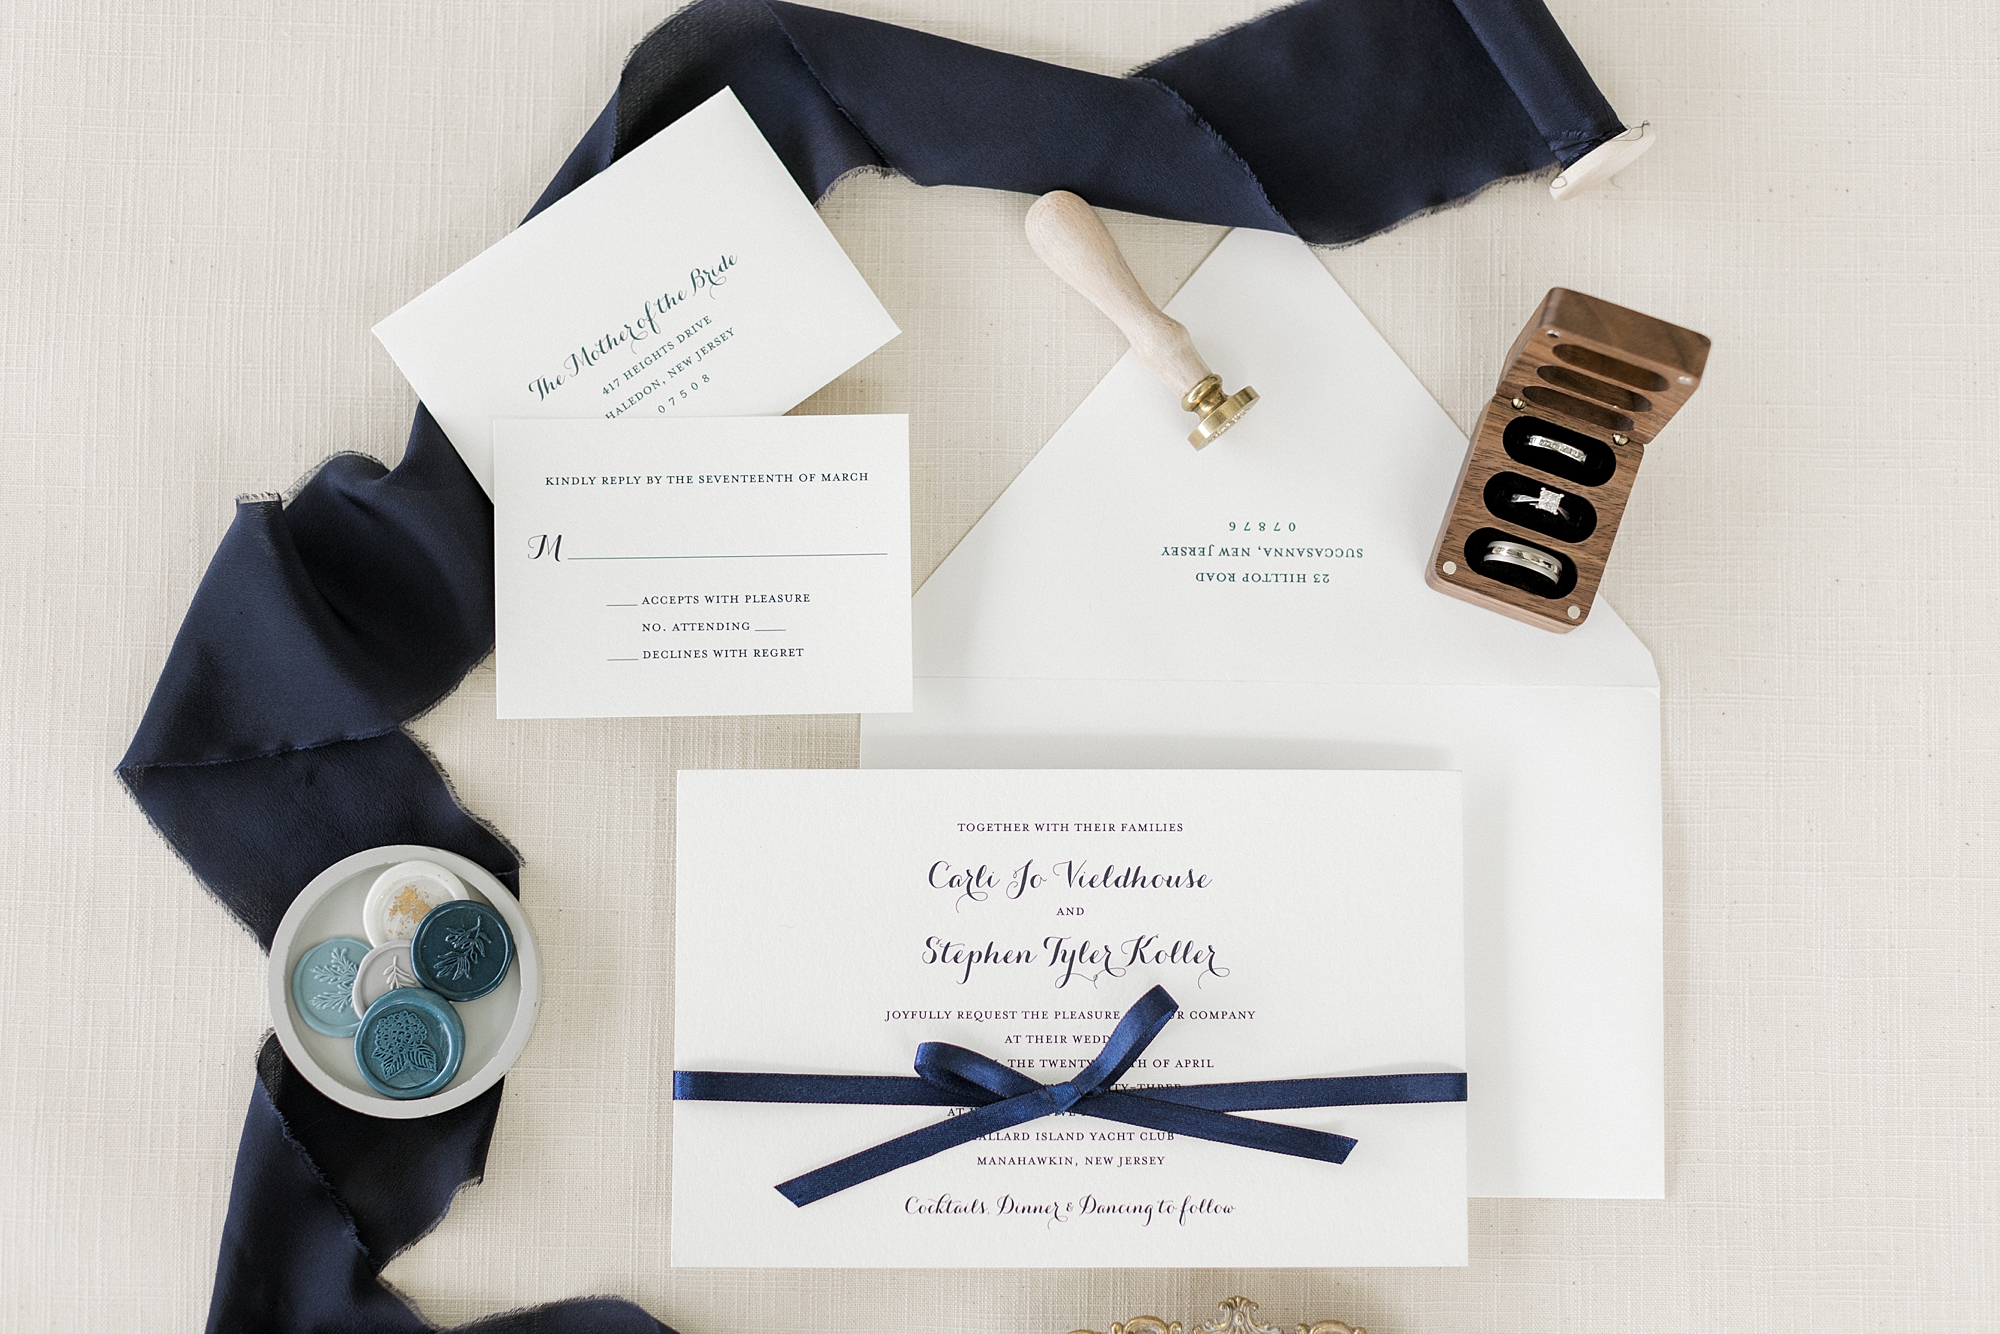 invitation suite with navy blue ribbon and rings around it